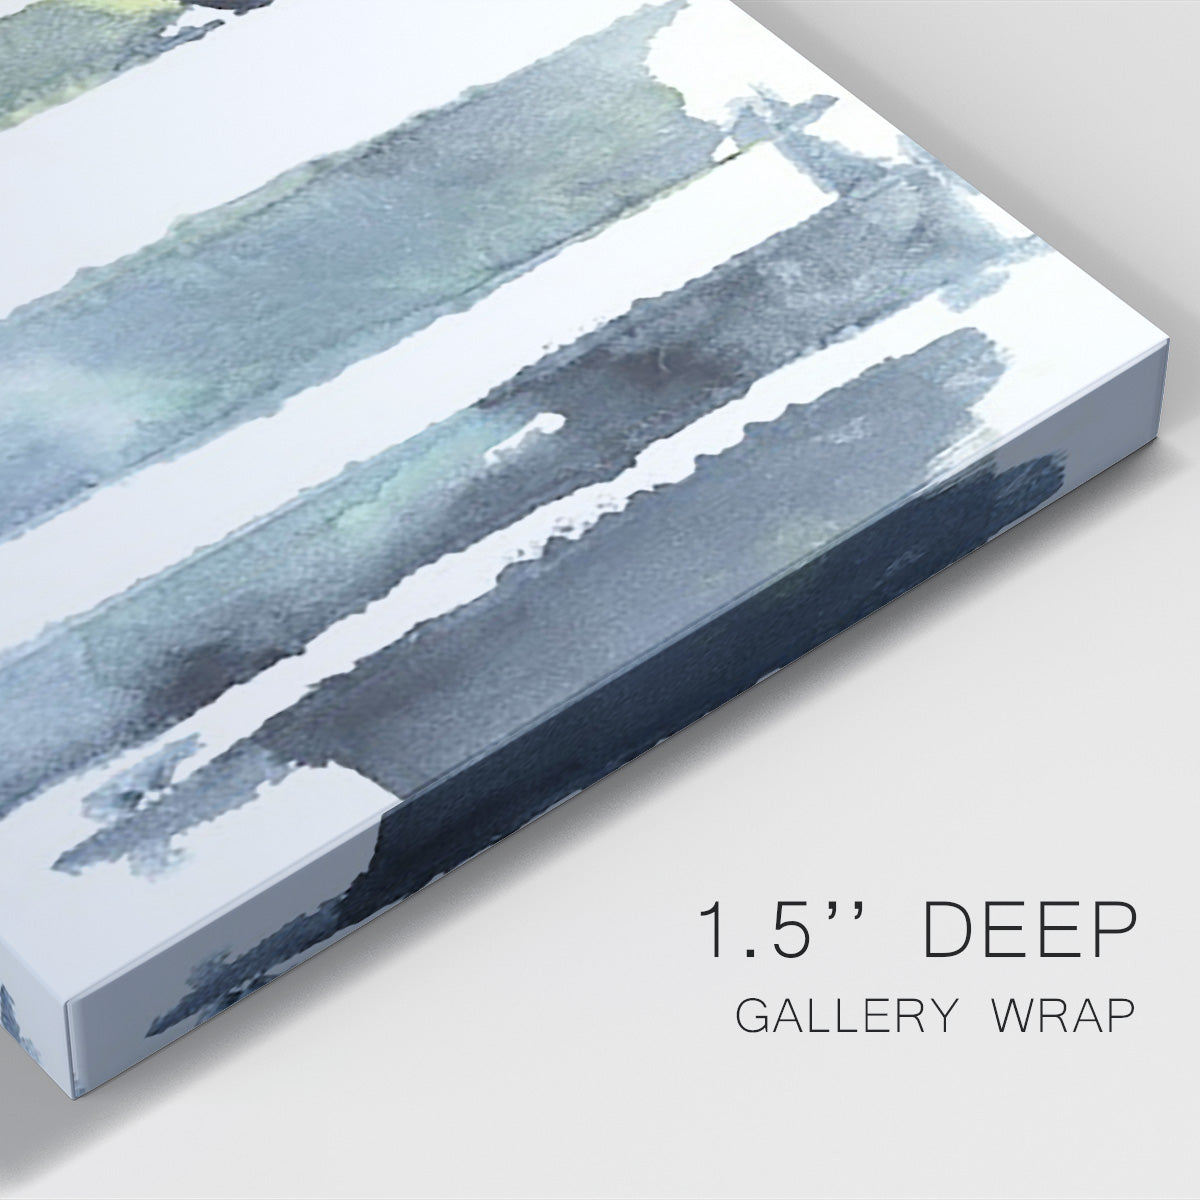 Blue Memories I Premium Gallery Wrapped Canvas - Ready to Hang